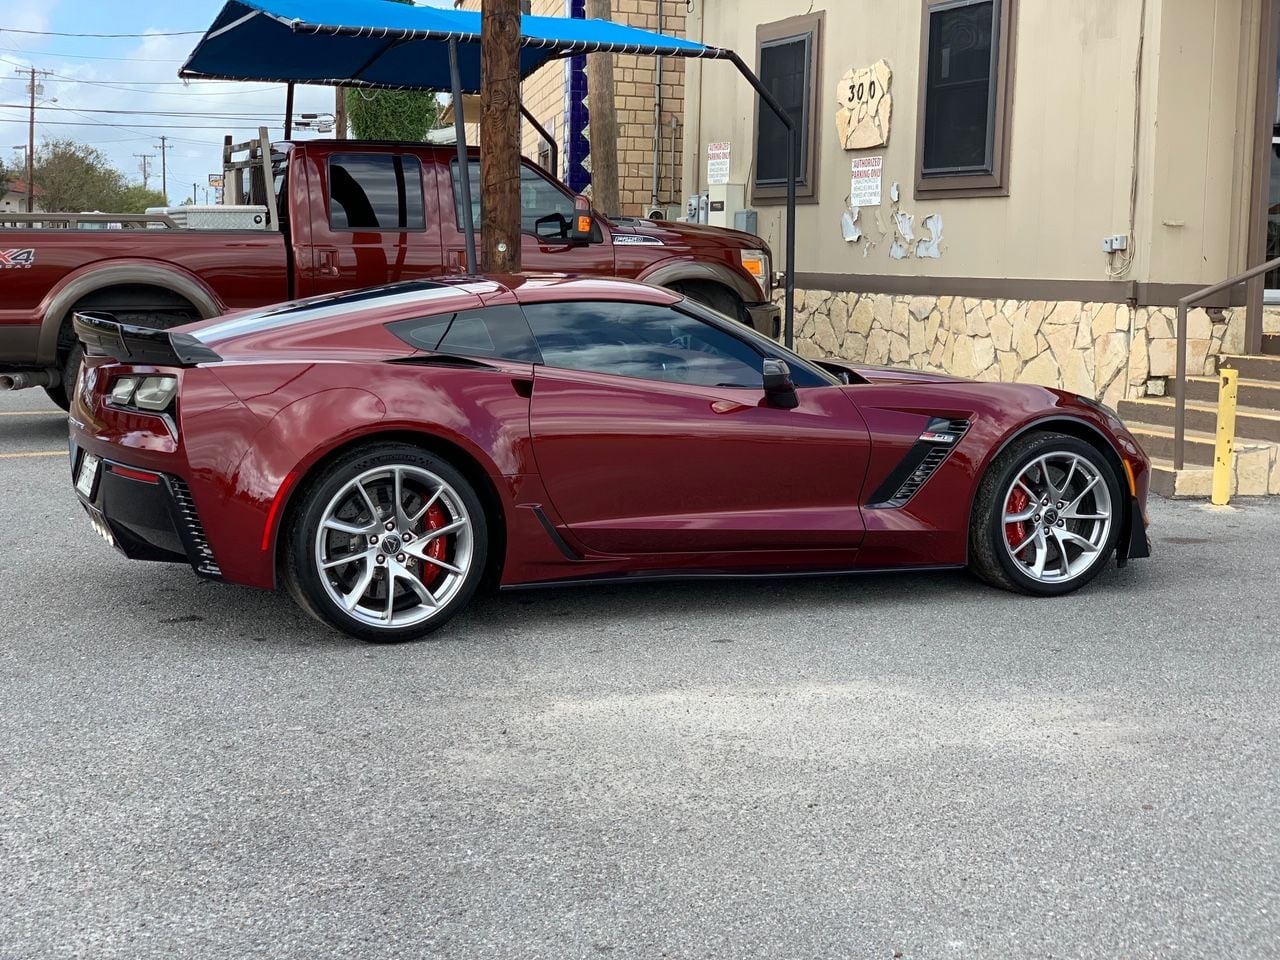 2016 Chevrolet Corvette - 2016 Z06 w/ Z07 pkg Long Beach Red A8 - Used - VIN 1G1YU2D64G5607204 - 3,276 Miles - 8 cyl - 2WD - Automatic - Coupe - Red - Weslaco, TX 78596, United States